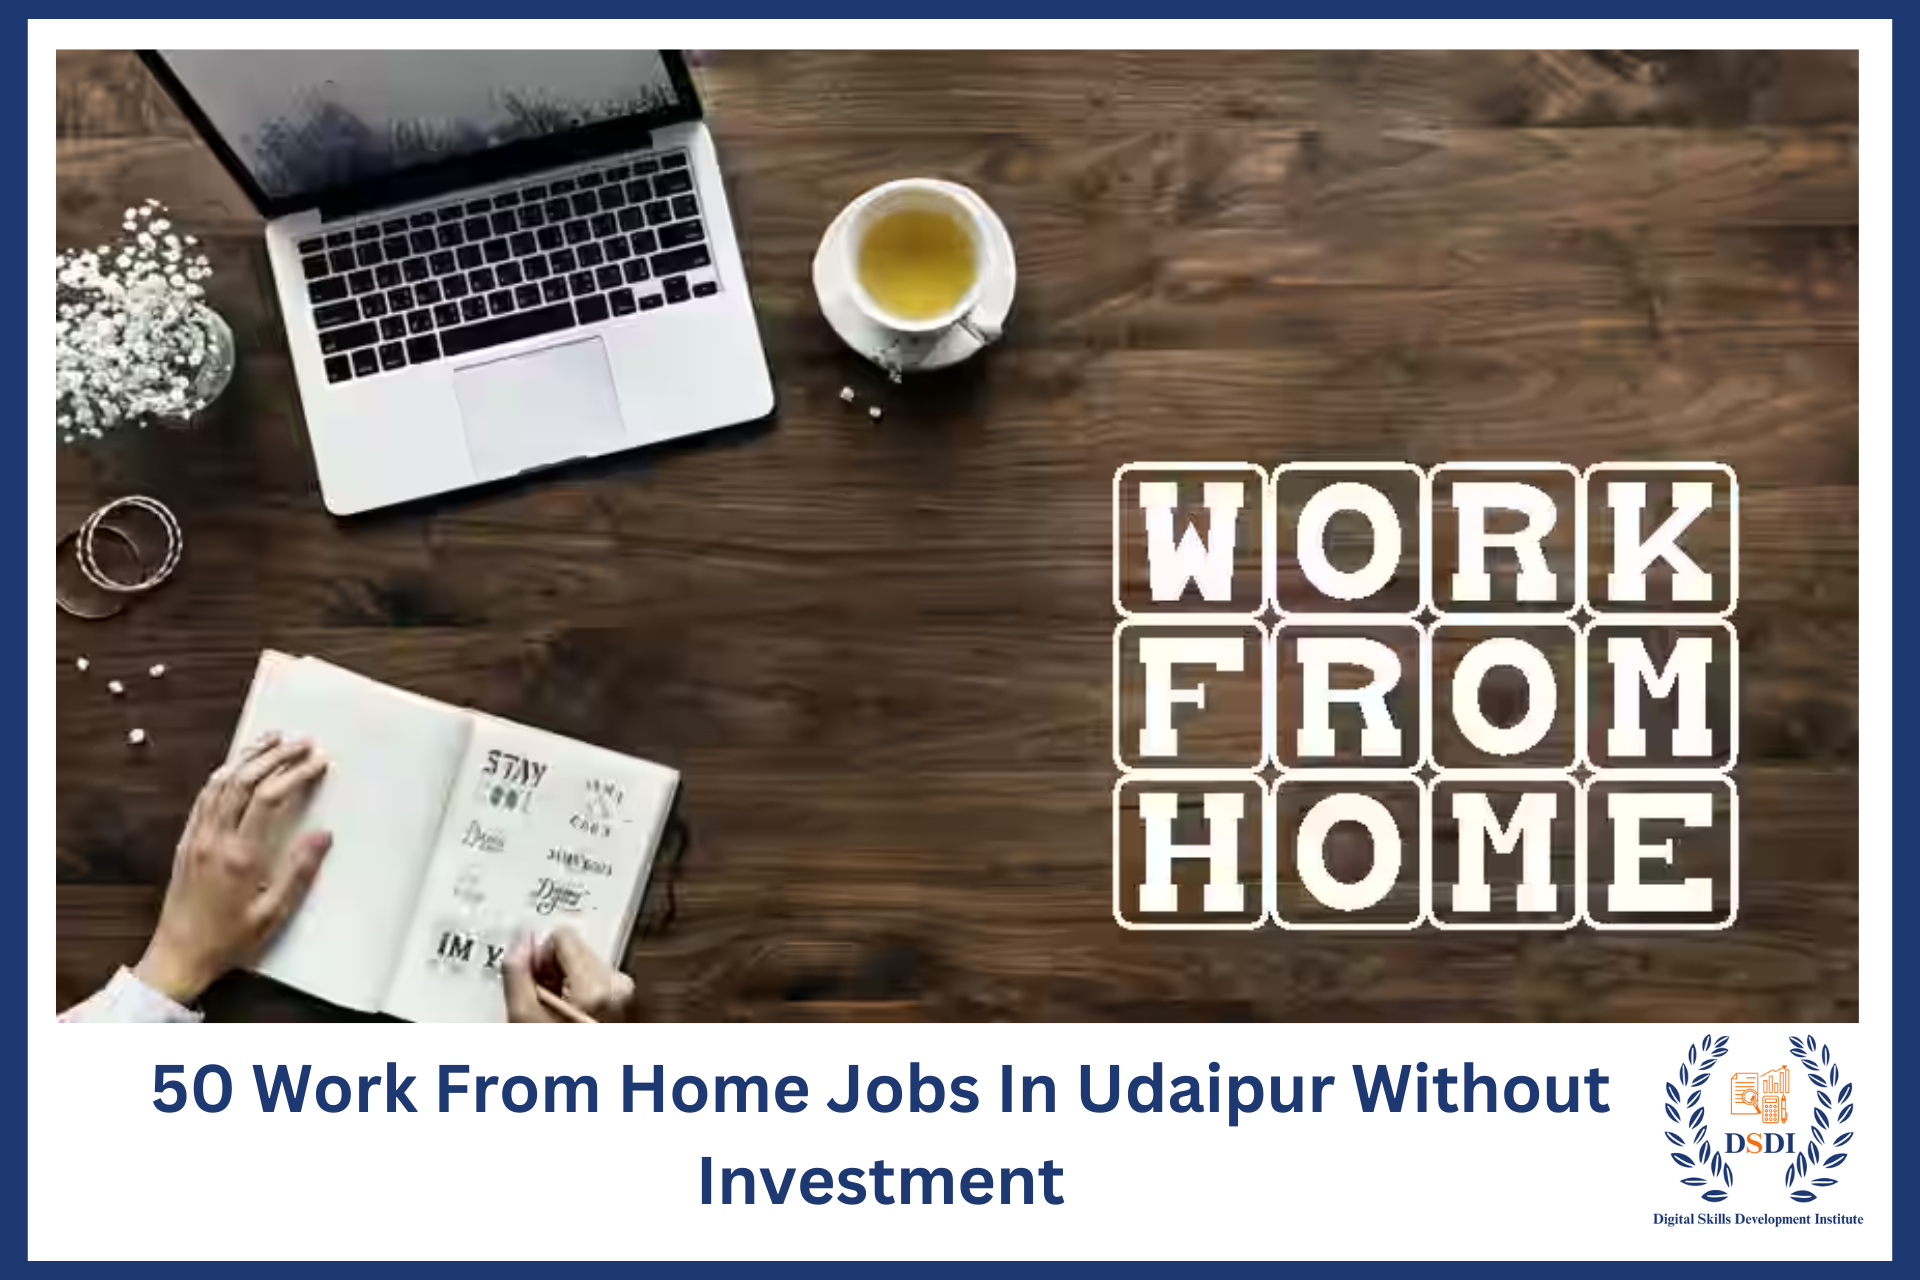 Work From Home Jobs In Udaipur